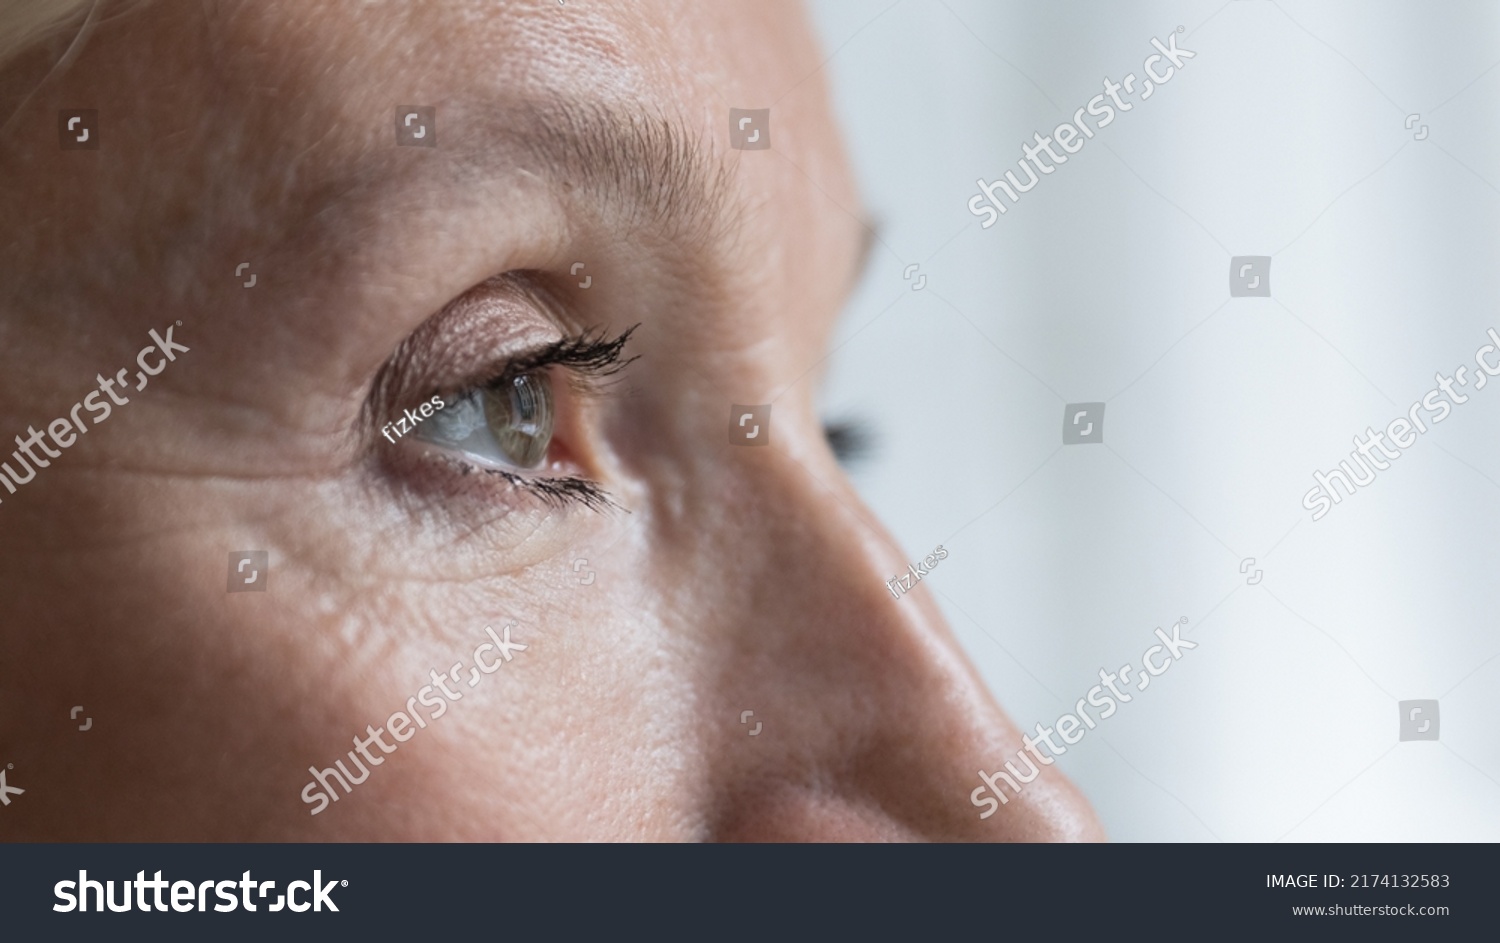 Close up cropped shot, face of senior woman eye looking straight, into distance. Eyesight, ophthalmology clinic advertisement for older, eye-care, disease prevention, vision care and treatment concept #2174132583